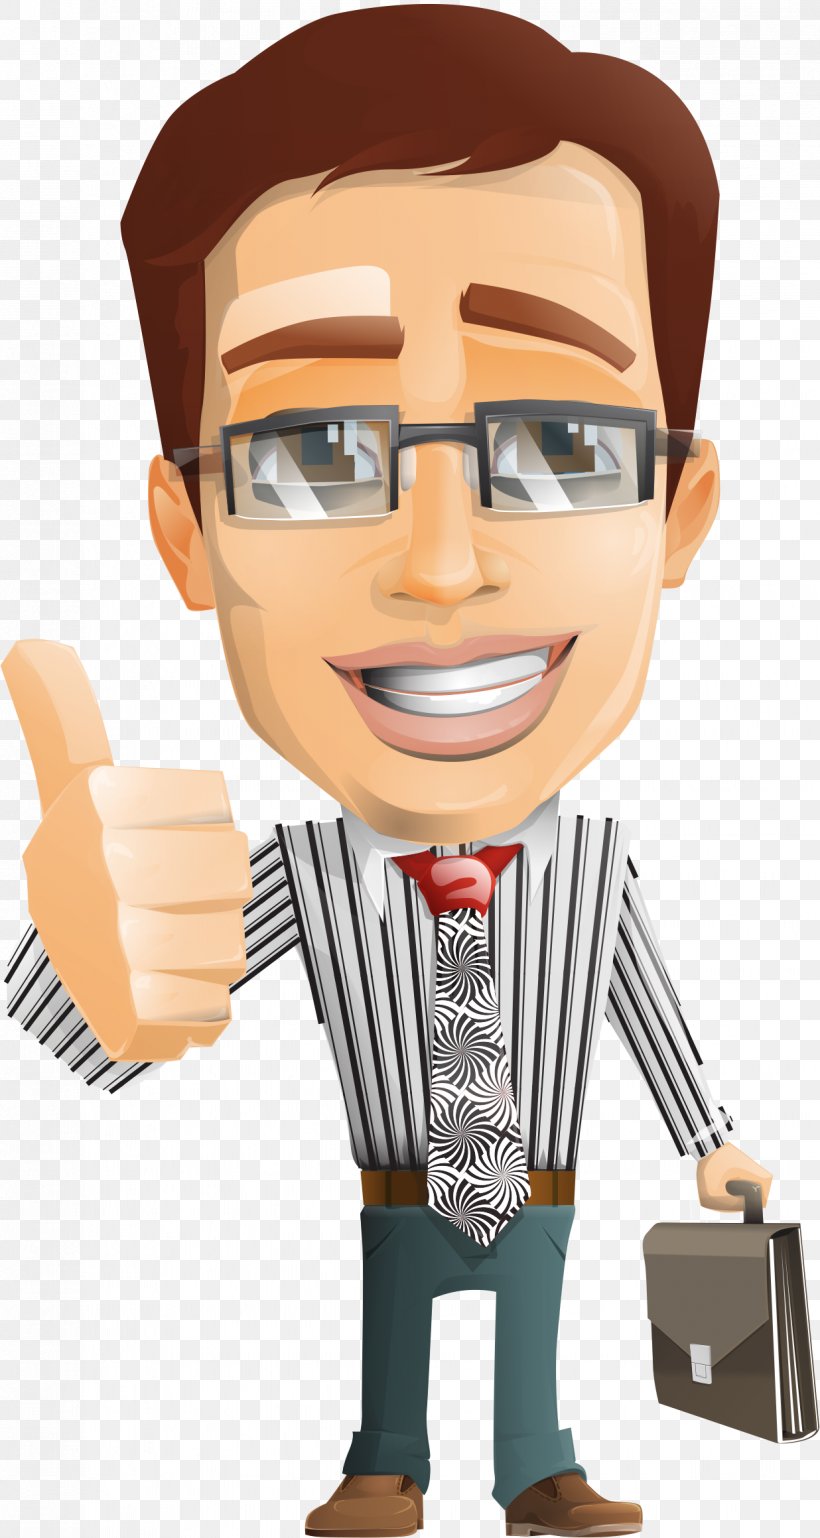 Thumb Signal Management Business Animation, PNG, 1236x2319px, Thumb Signal, Animation, Business, Businessperson, Cartoon Download Free